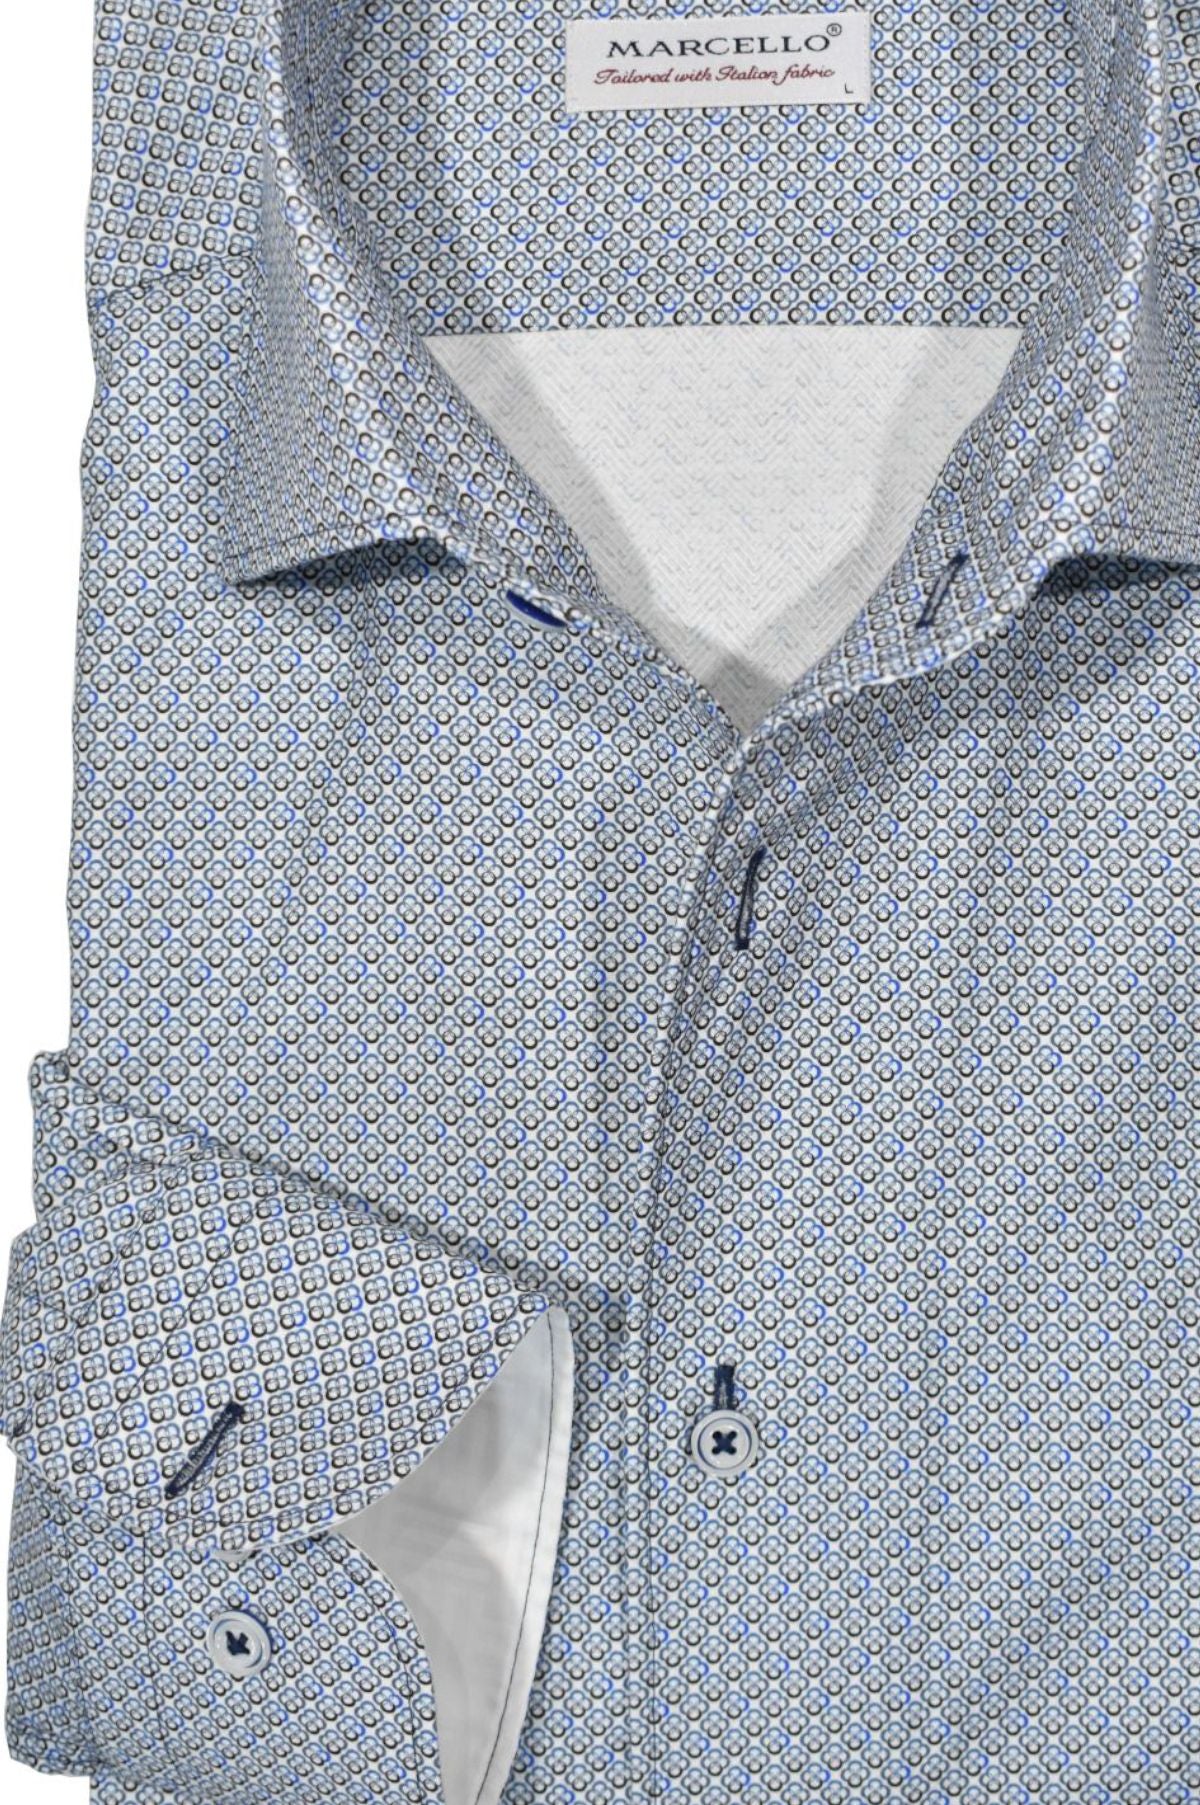 Delicately crafted with a combination of soft cotton fabric and Marcello's signature open roll collar, this piece features a sophisticated clover print in blue, tan and black, as well as custom hand-selected buttons and a timeless silhouette. The neat pattern exudes a fashion statement while remaining truly classic in nature. Classic shaped fit.